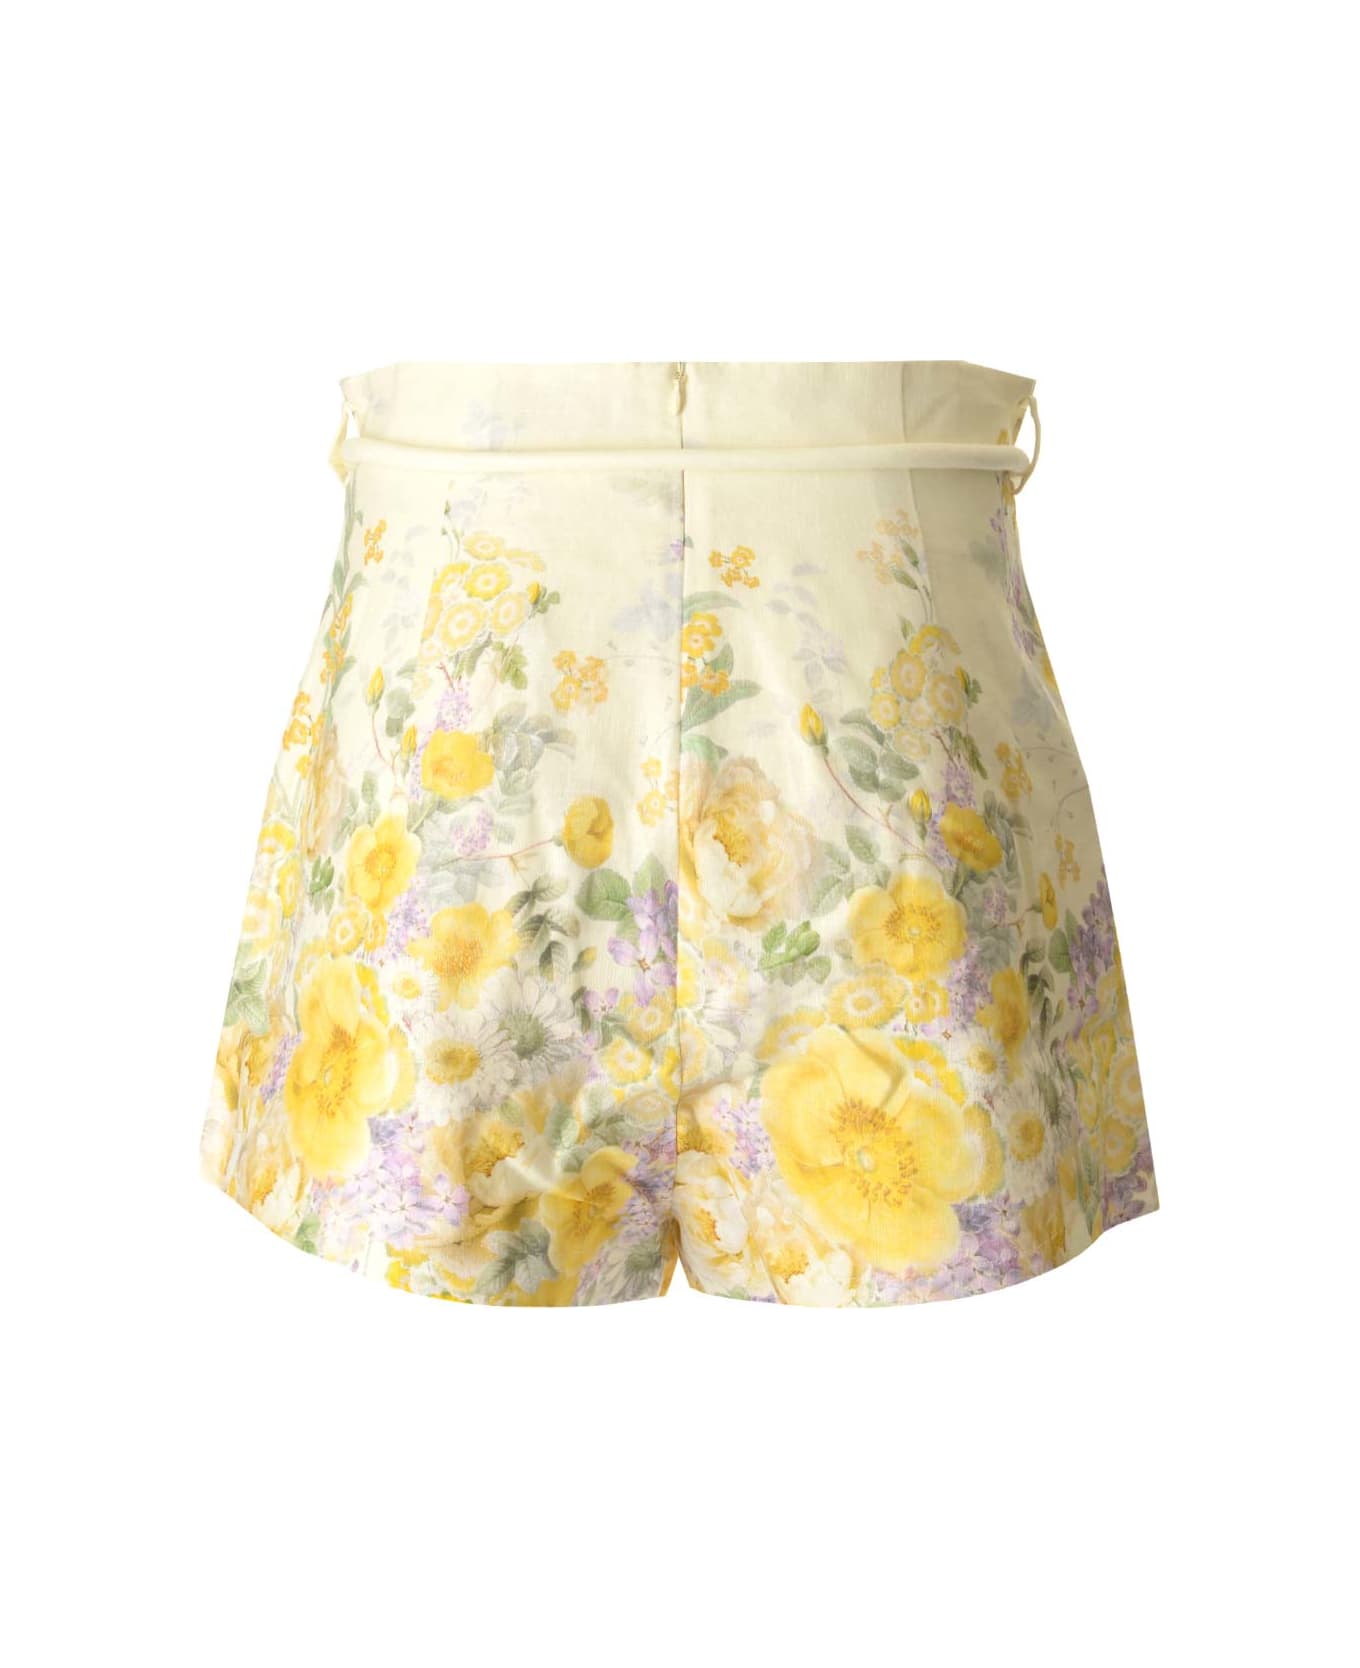 Zimmermann 'harmony' Shorts With Floral Print - MultiColour